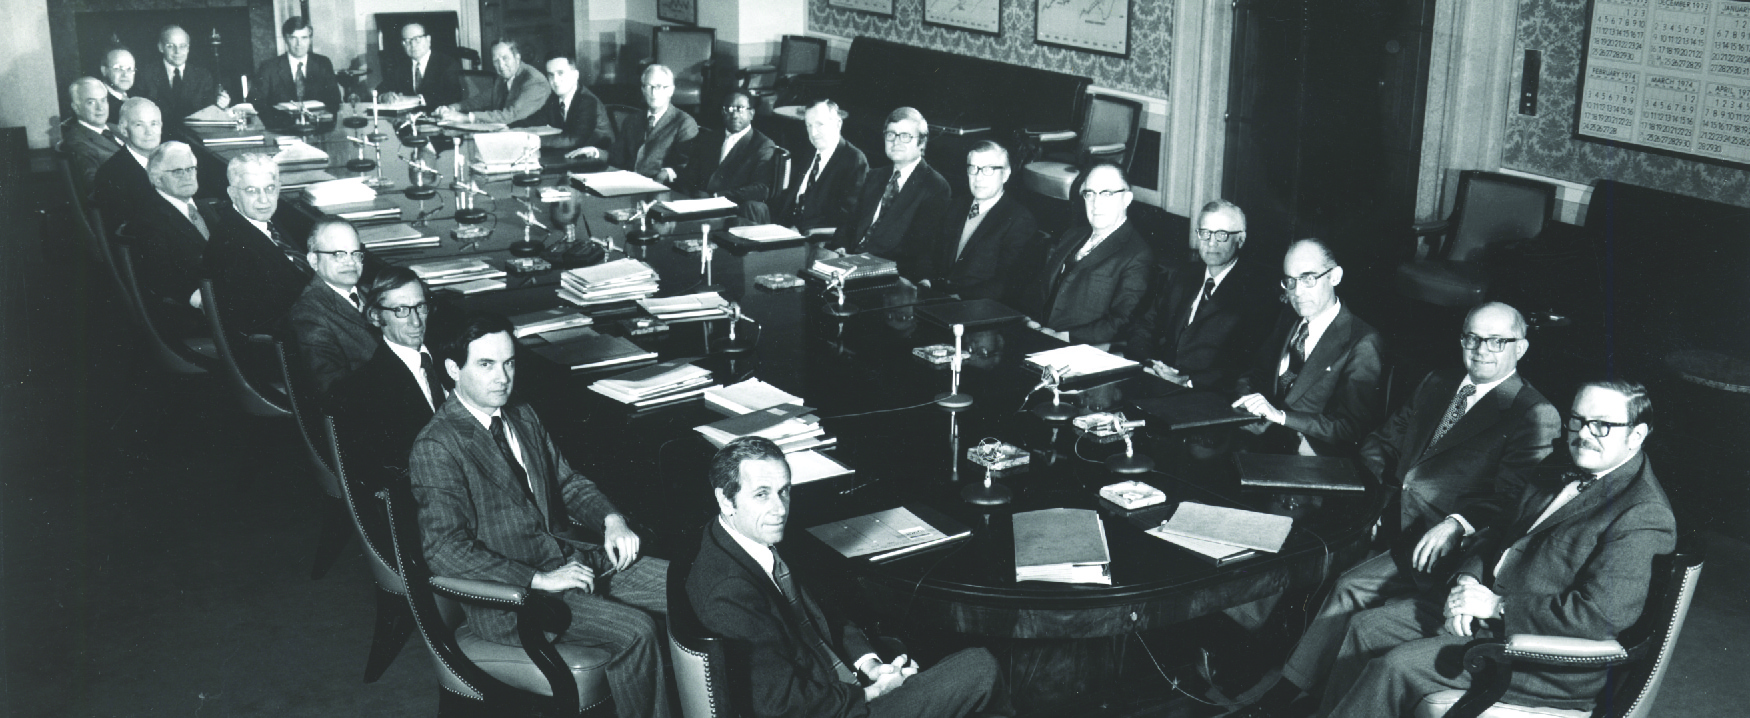 This image shows twenty-three white men and one black man in suits sitting around a large boardroom-style table.